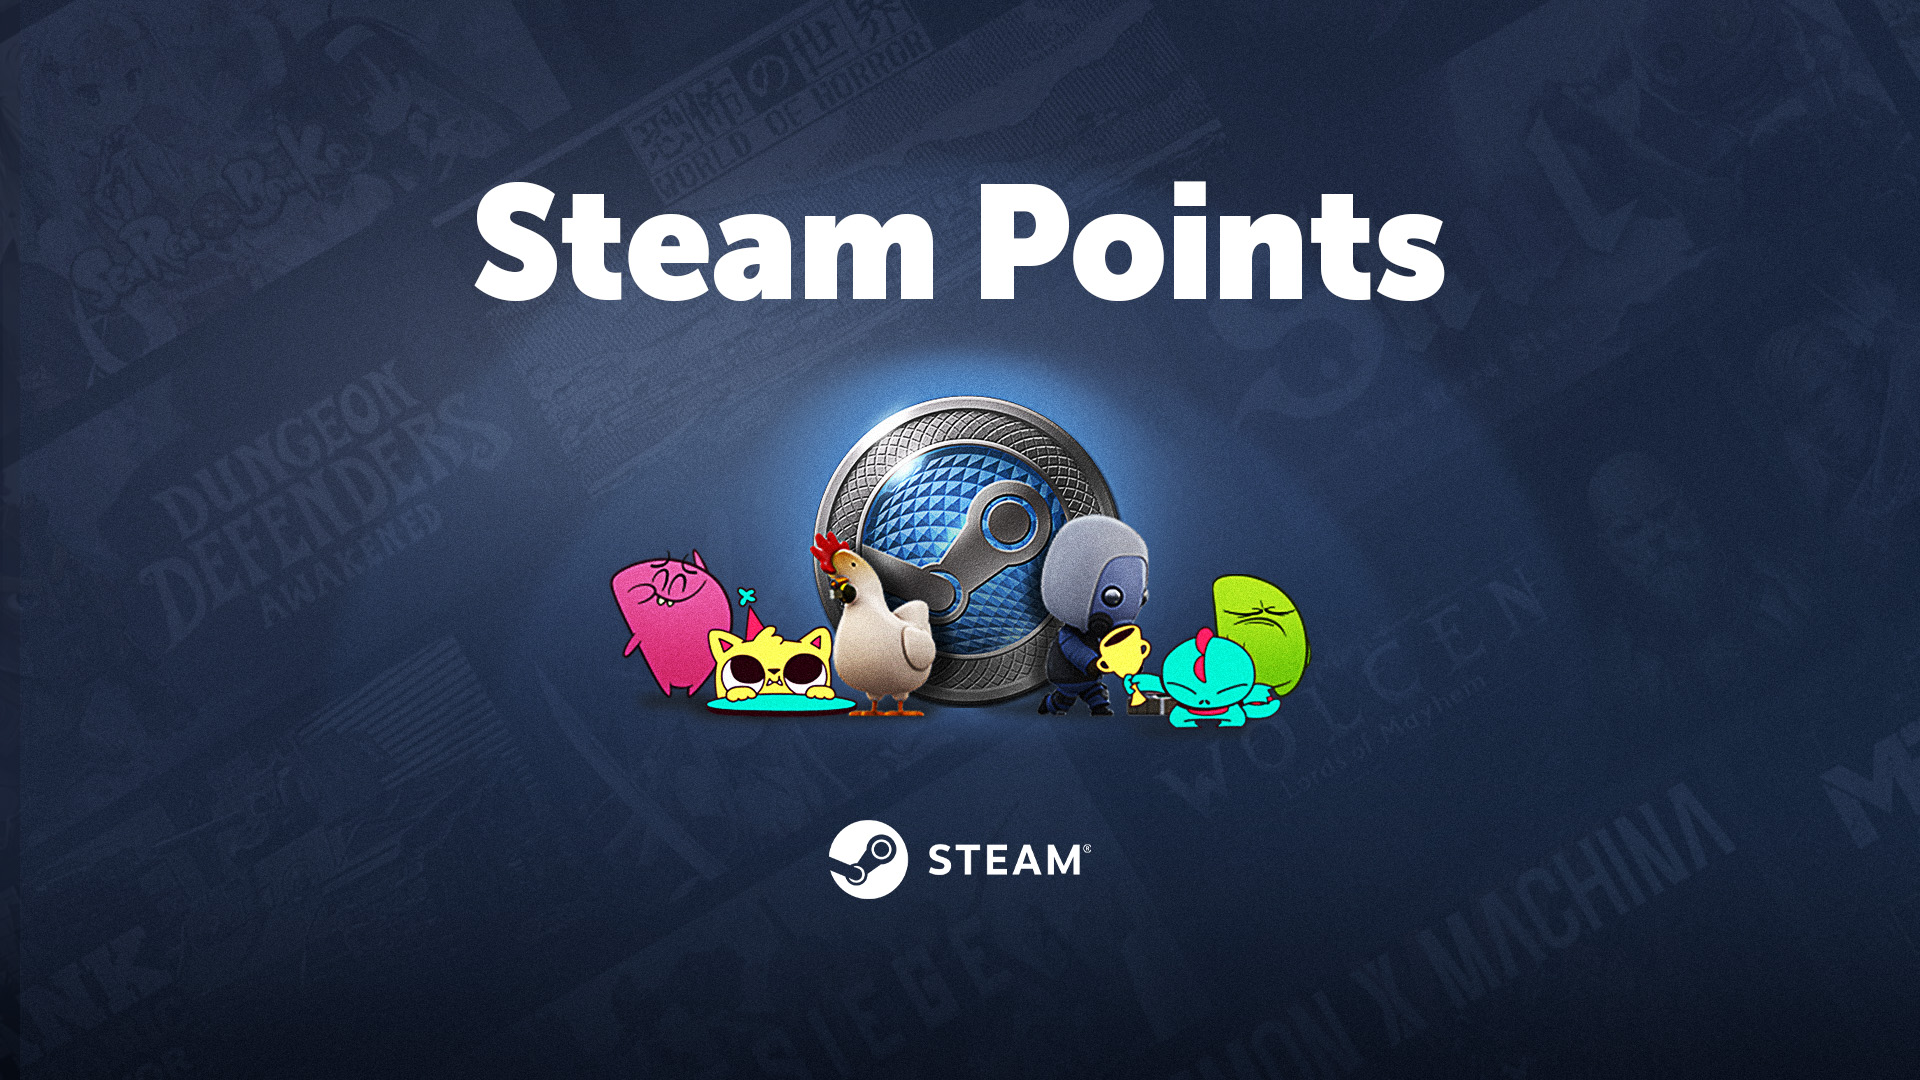 5.000 Steam Points Manual Delivery (2.54$)